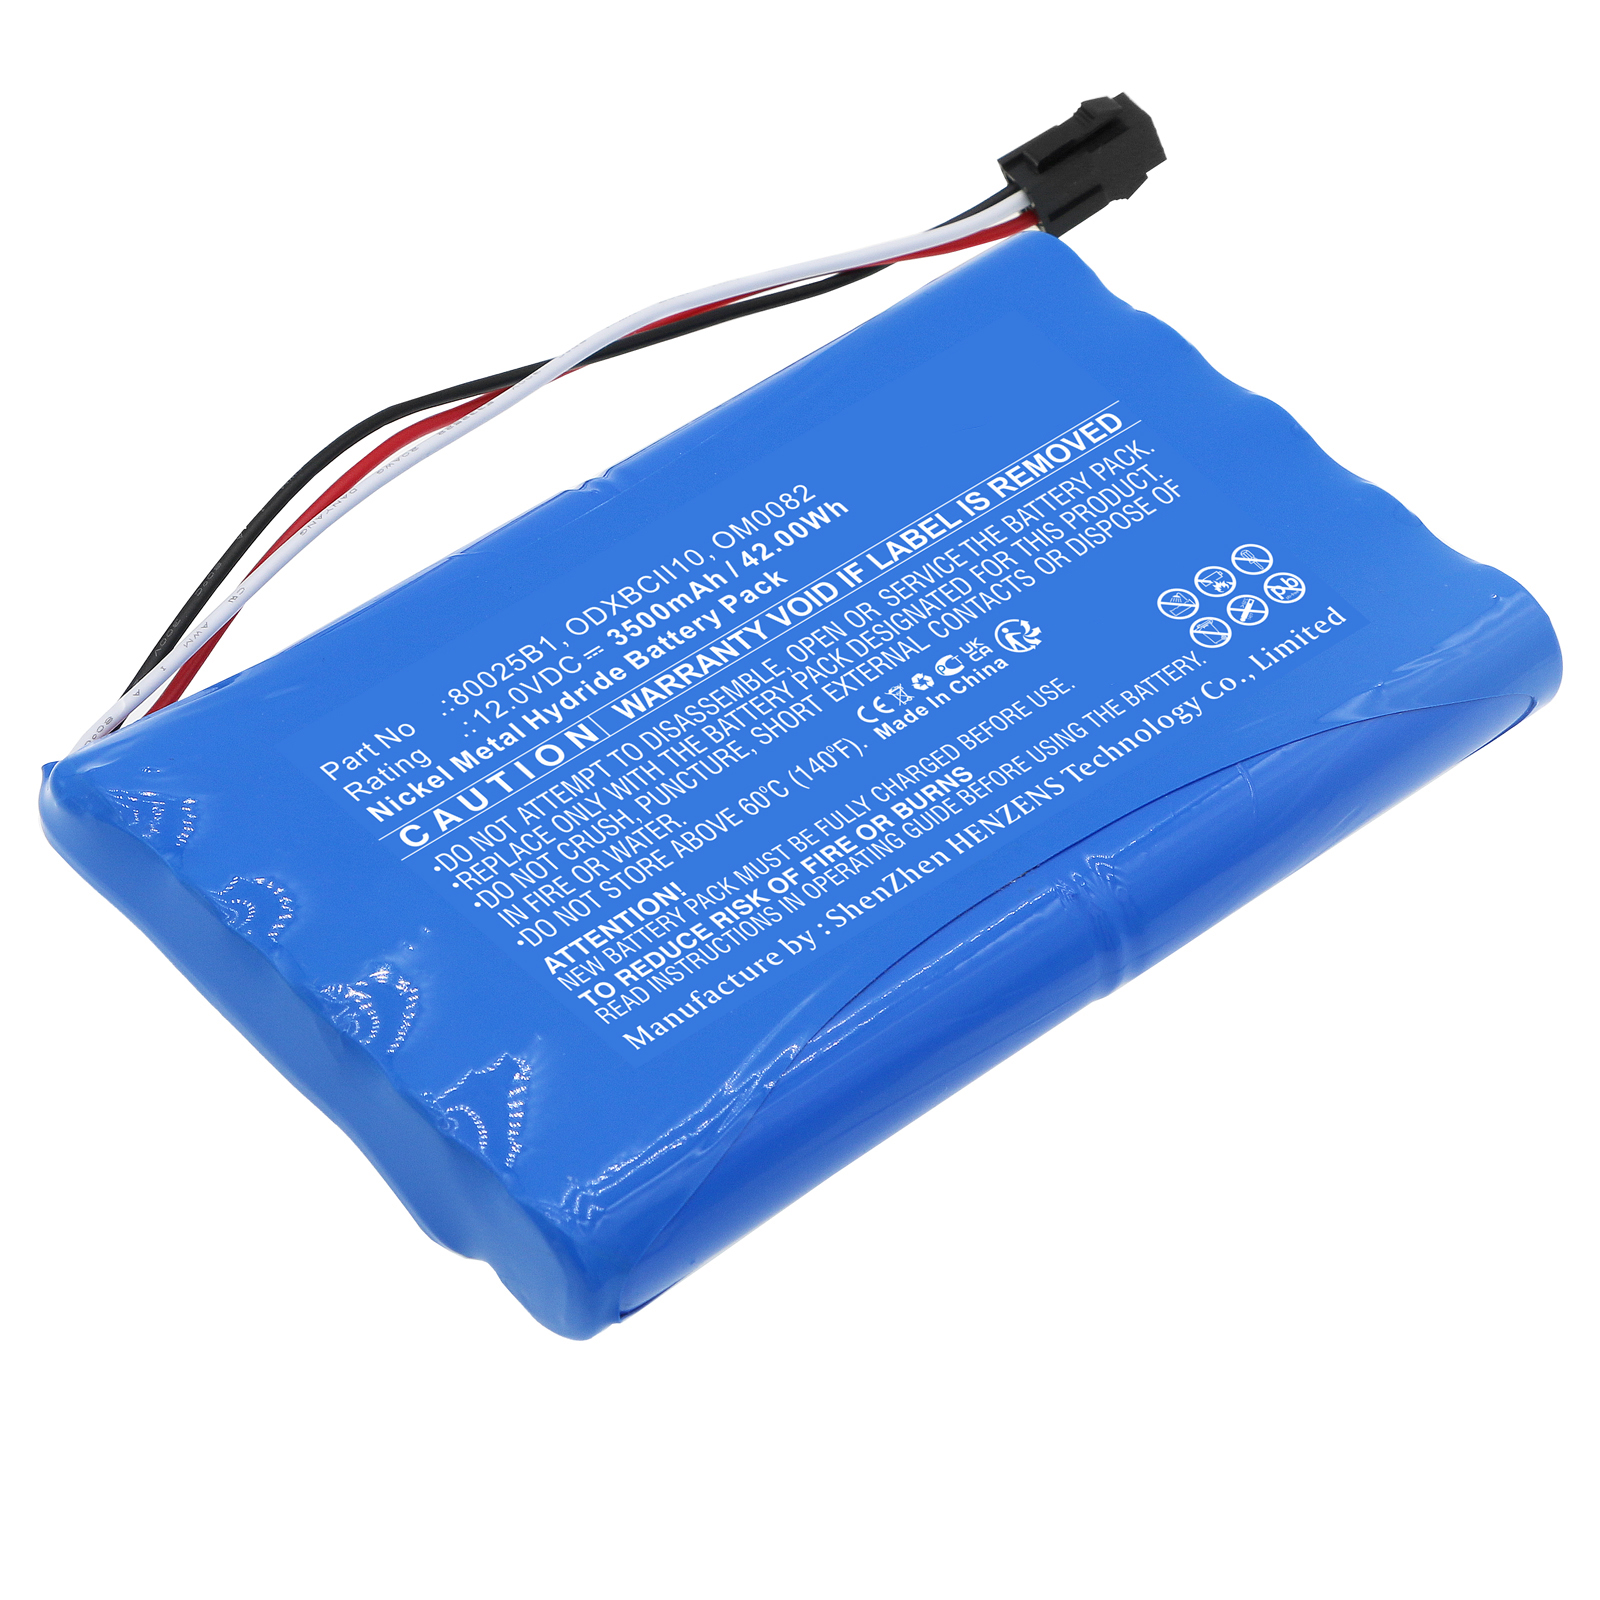 Synergy Digital Medical Battery, Compatible with Smiths ODXBCII10 Medical Battery (Ni-MH, 12V, 3500mAh)